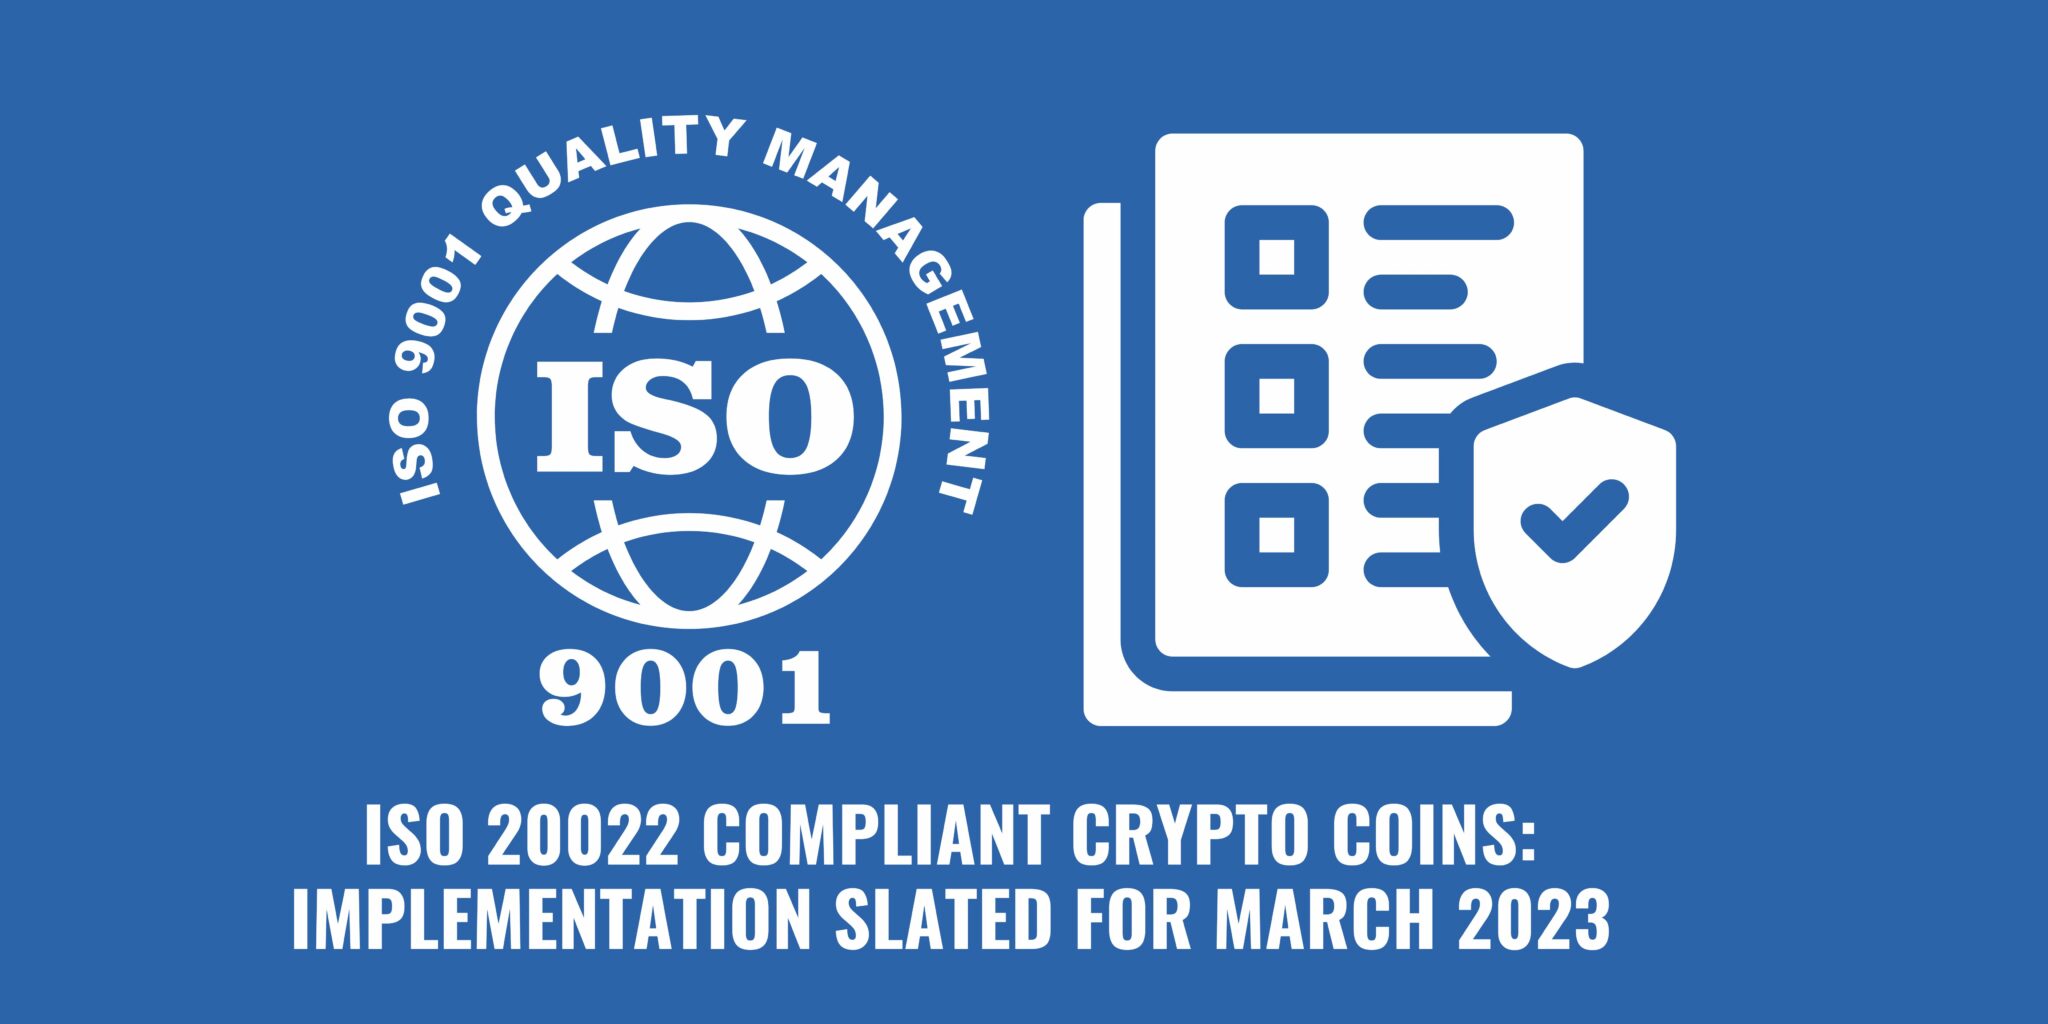 Iso compliant crypto coins how much is 1 btc in gbp